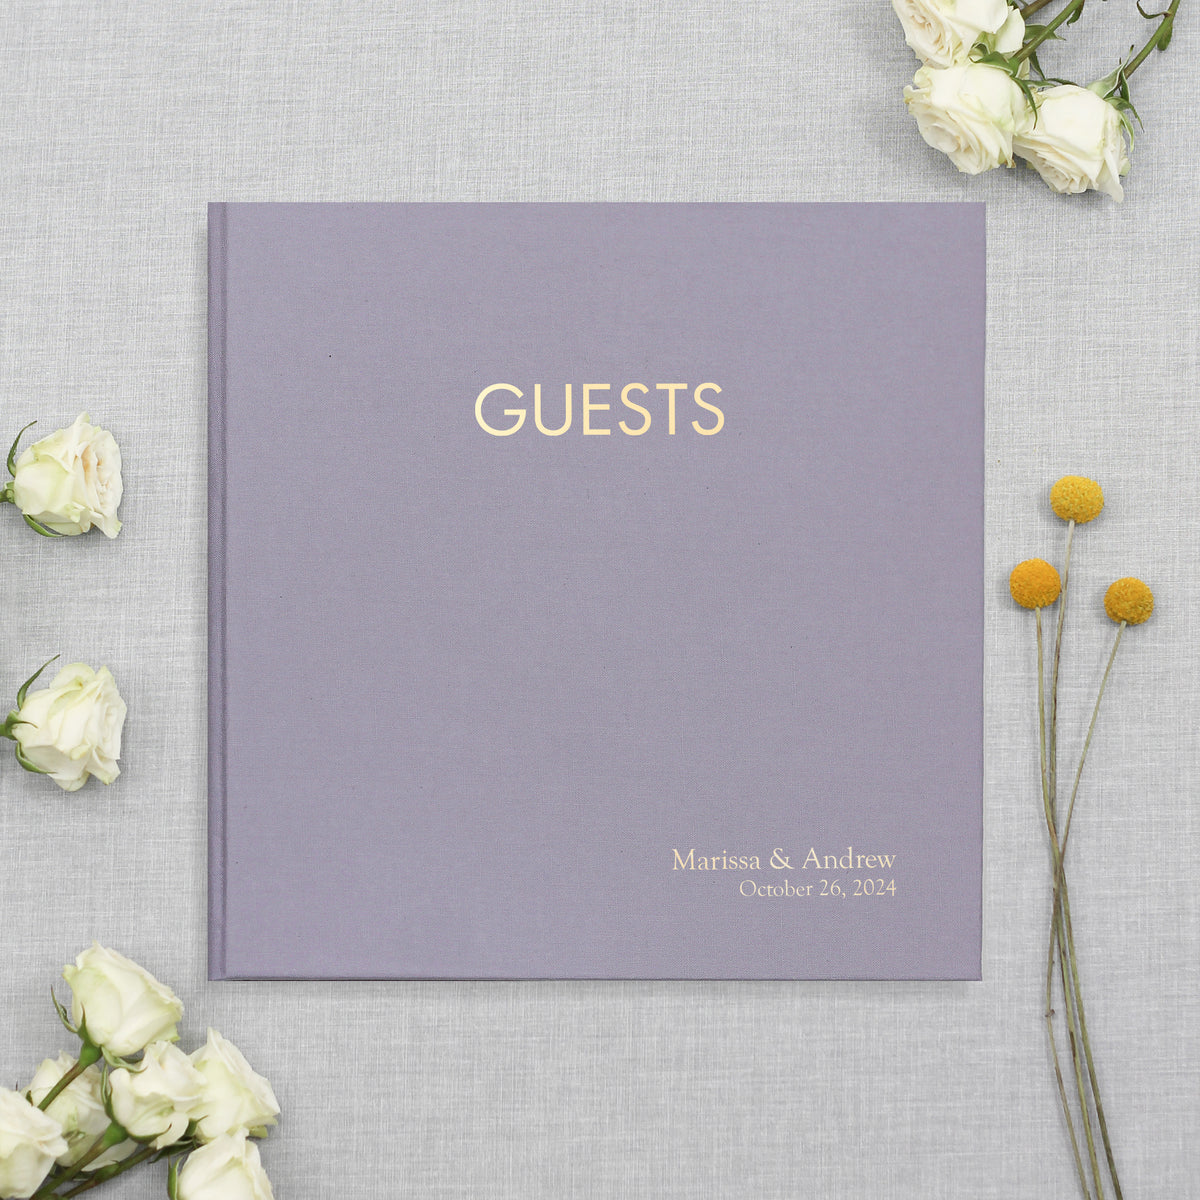 Event Guestbook | Cover: Lavender Cotton | Available Personalized